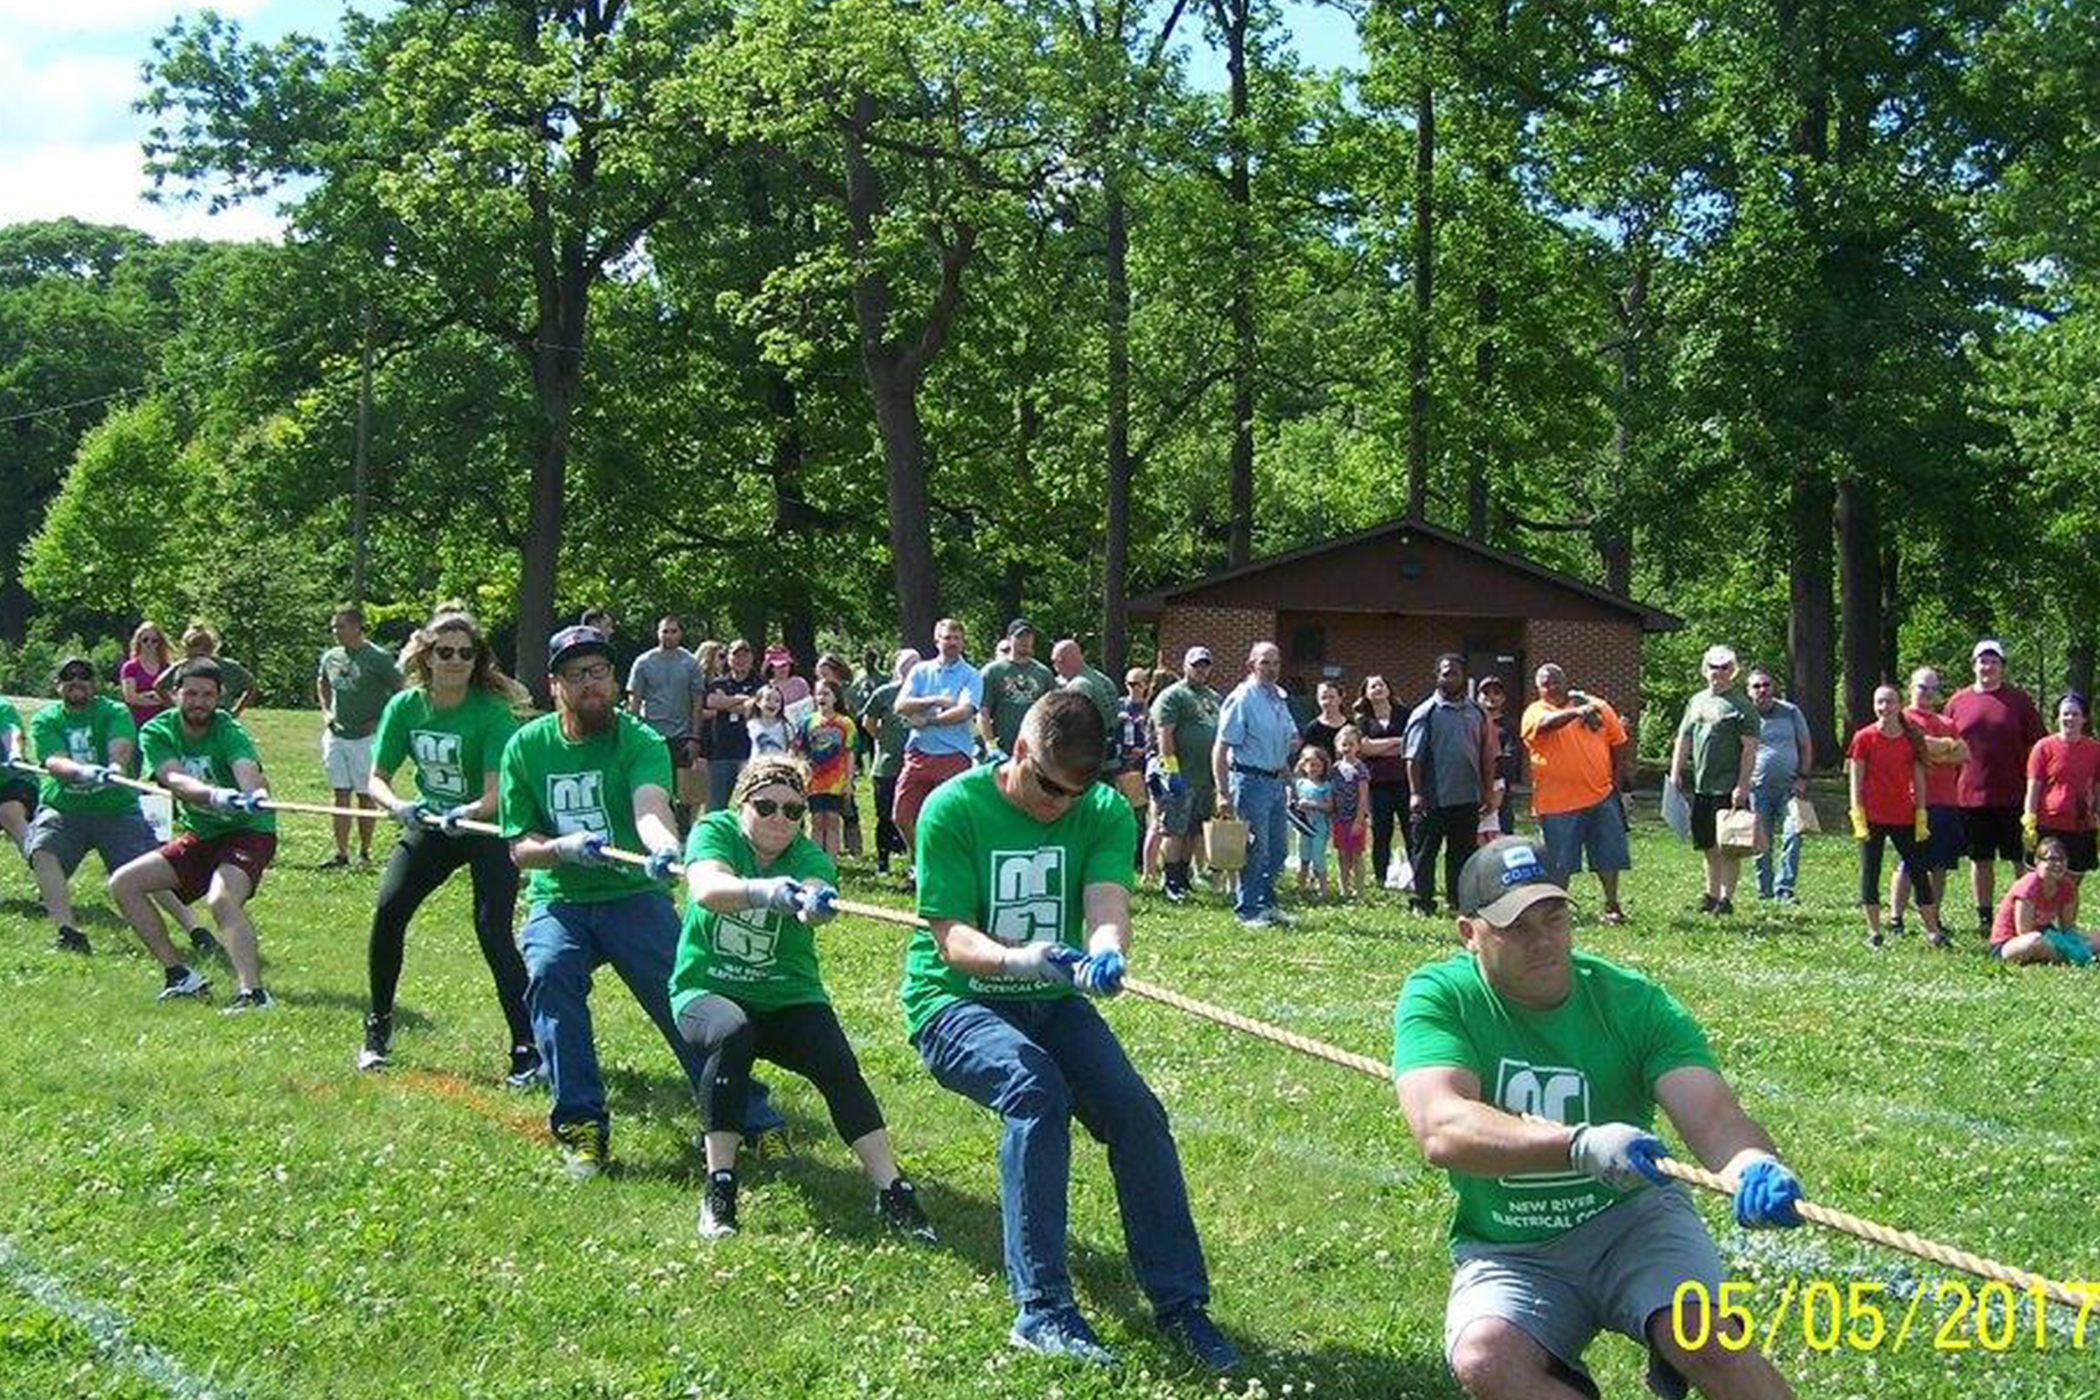 New River Electrical employees in green shirts pulling on a tug of war rope at tug for tots event.